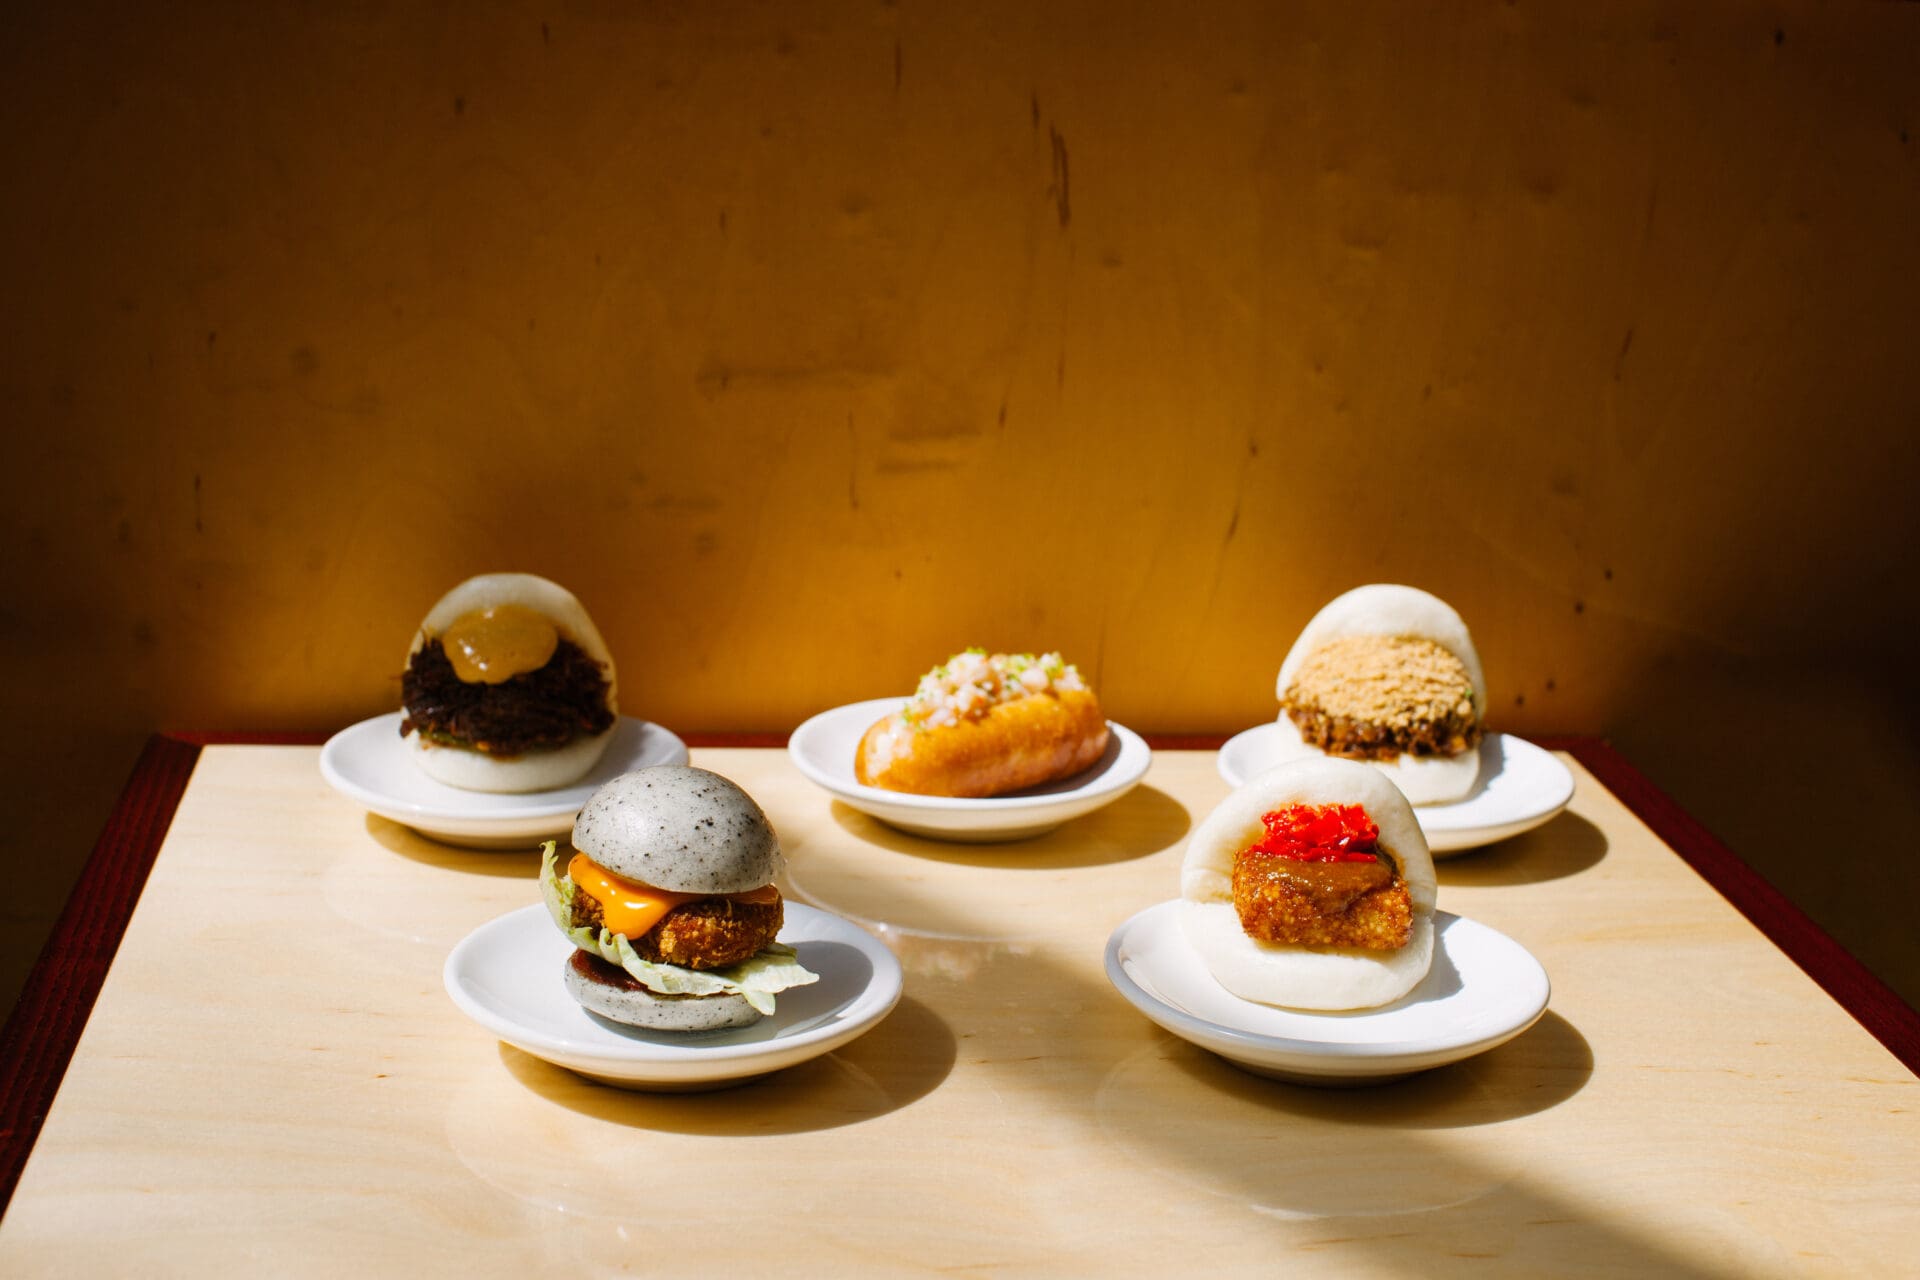 Best London restaurants | A selection of the unique bao available at Bao Borough, from classic options like pork to tiny fried chicken burgers